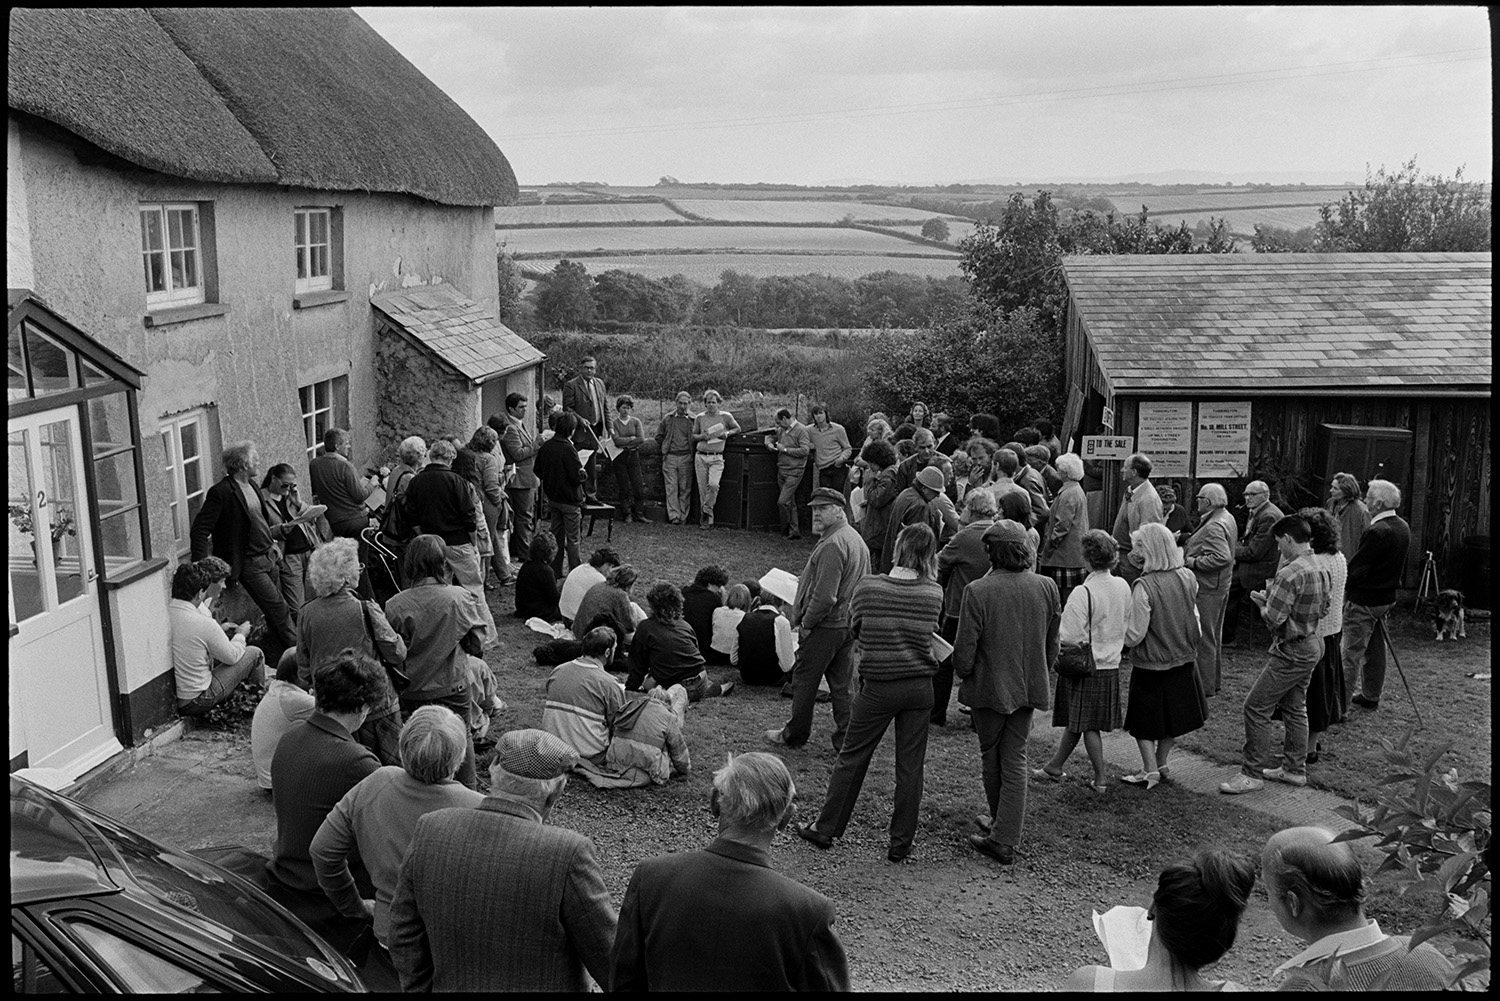 House auction, auctioneer standing on chair selling, man peering into house. Pot.
[A house auction at Roborough. Paul Foggo, the auctioneer, is stood on a chair by the doorway, with buyers and onlookers gathered around in the yard. A wooden shed is in the yard and fields are visible in the background.]